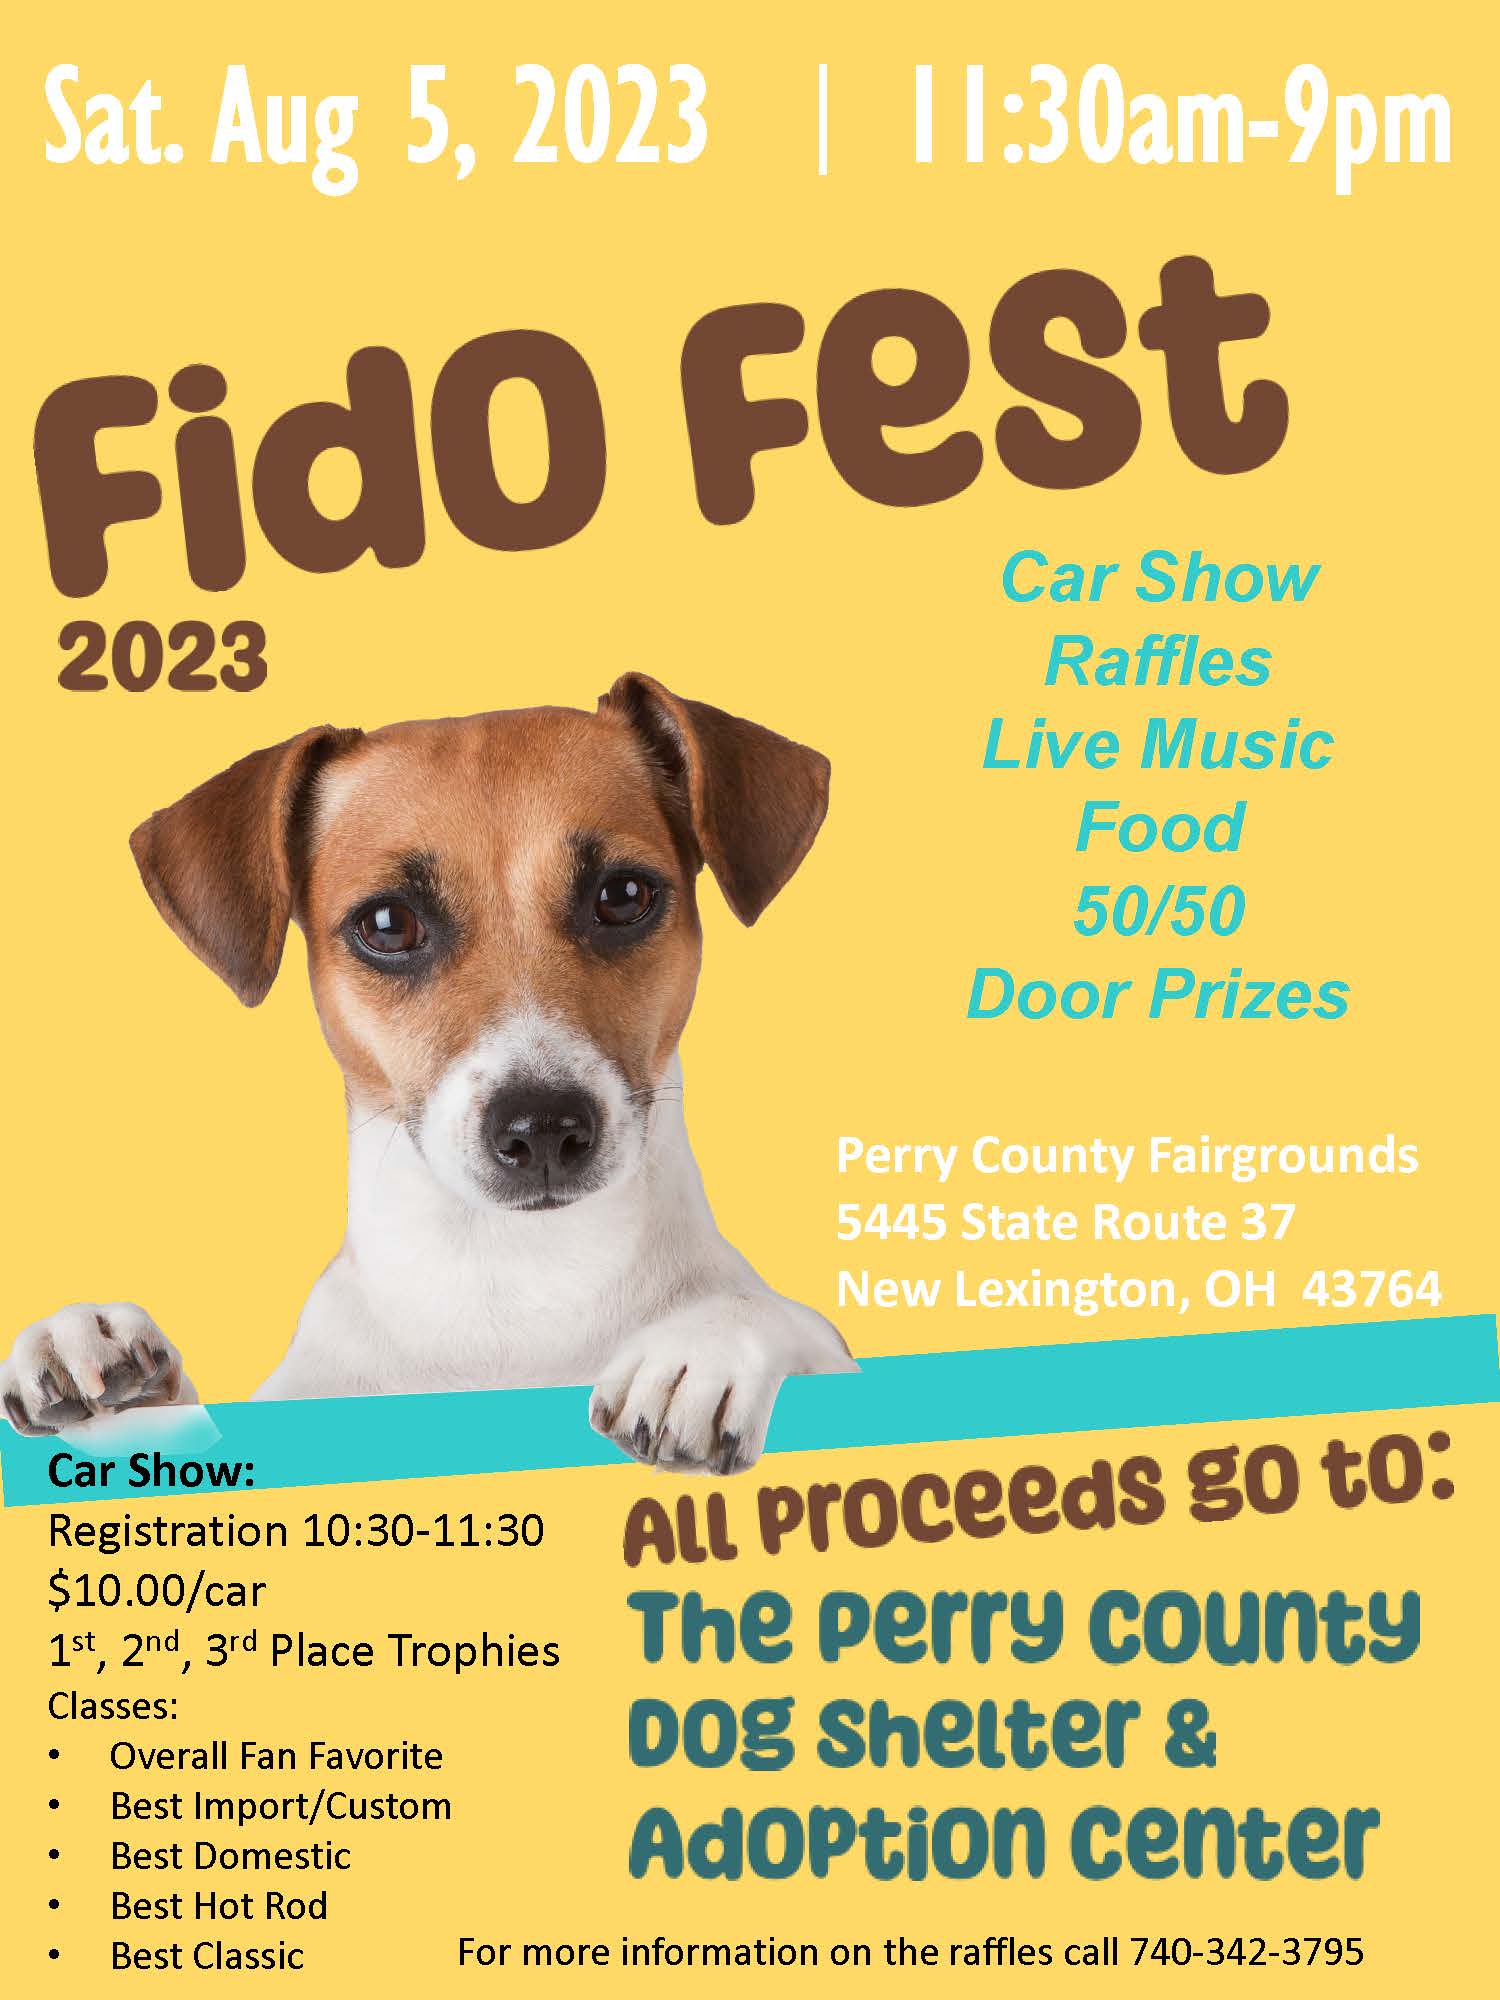 An image of a flyer for Fido Fest 2023.